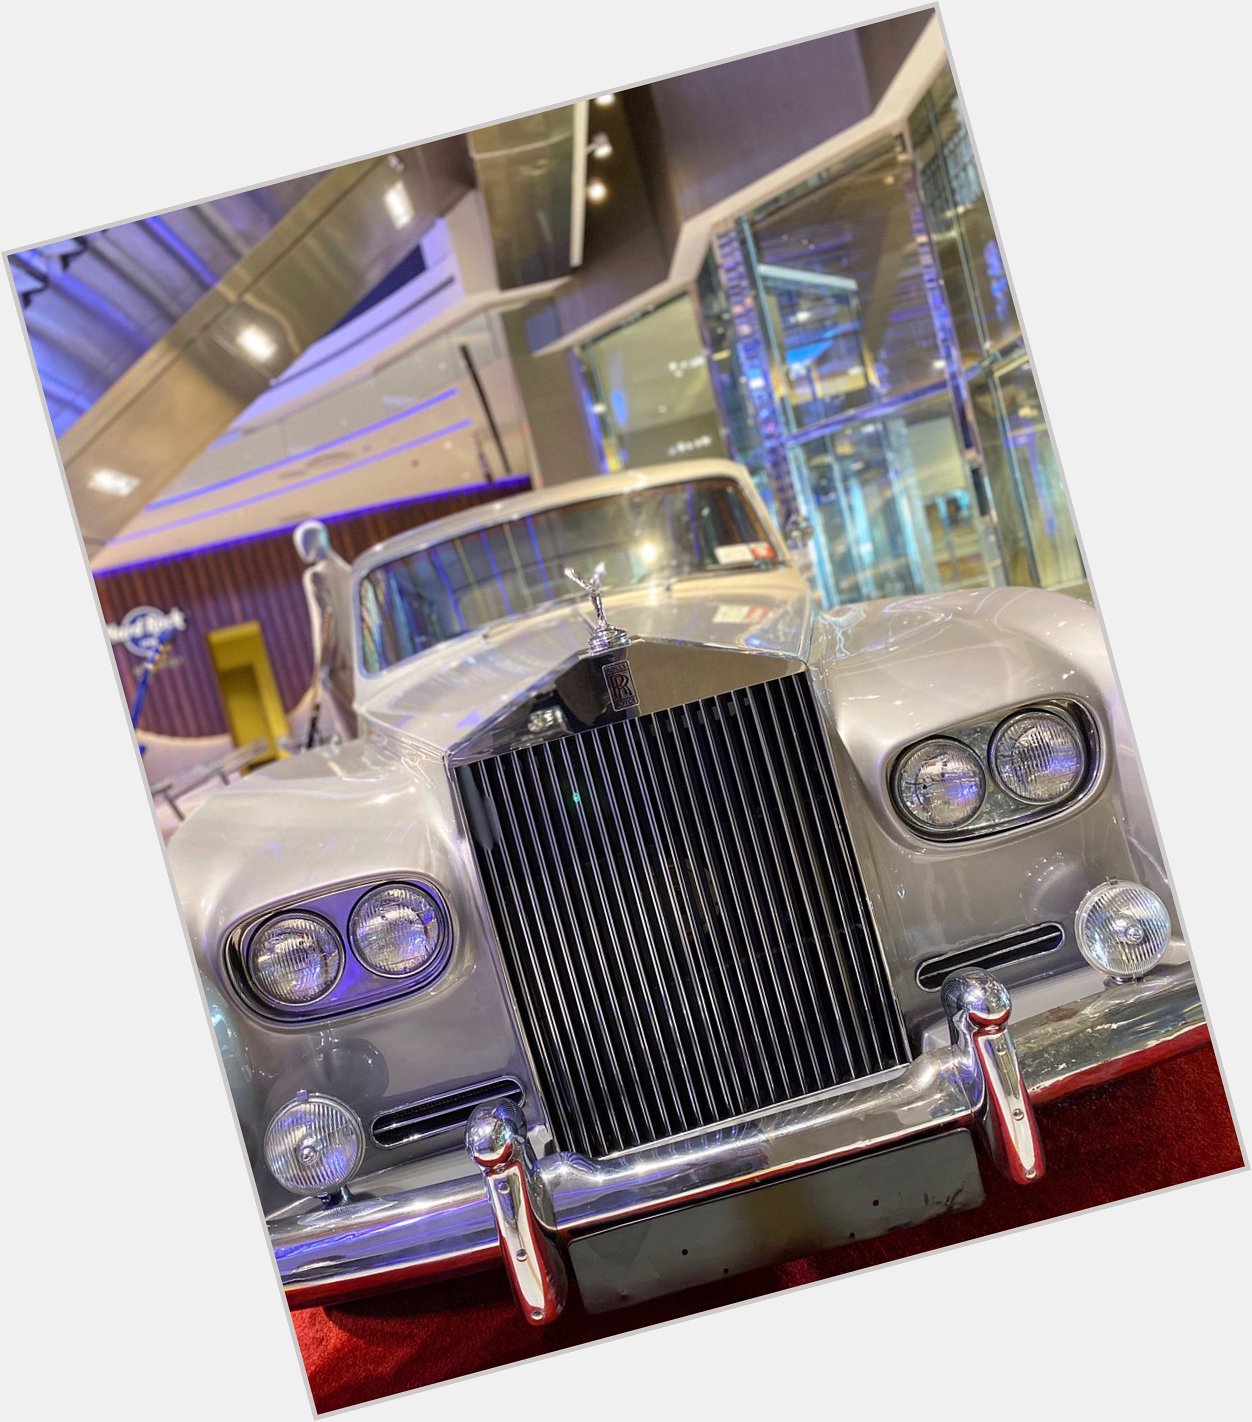 Happy birthday to the king, Elvis Presley! This 1963 Rolls Royce was owned by the king himself. 